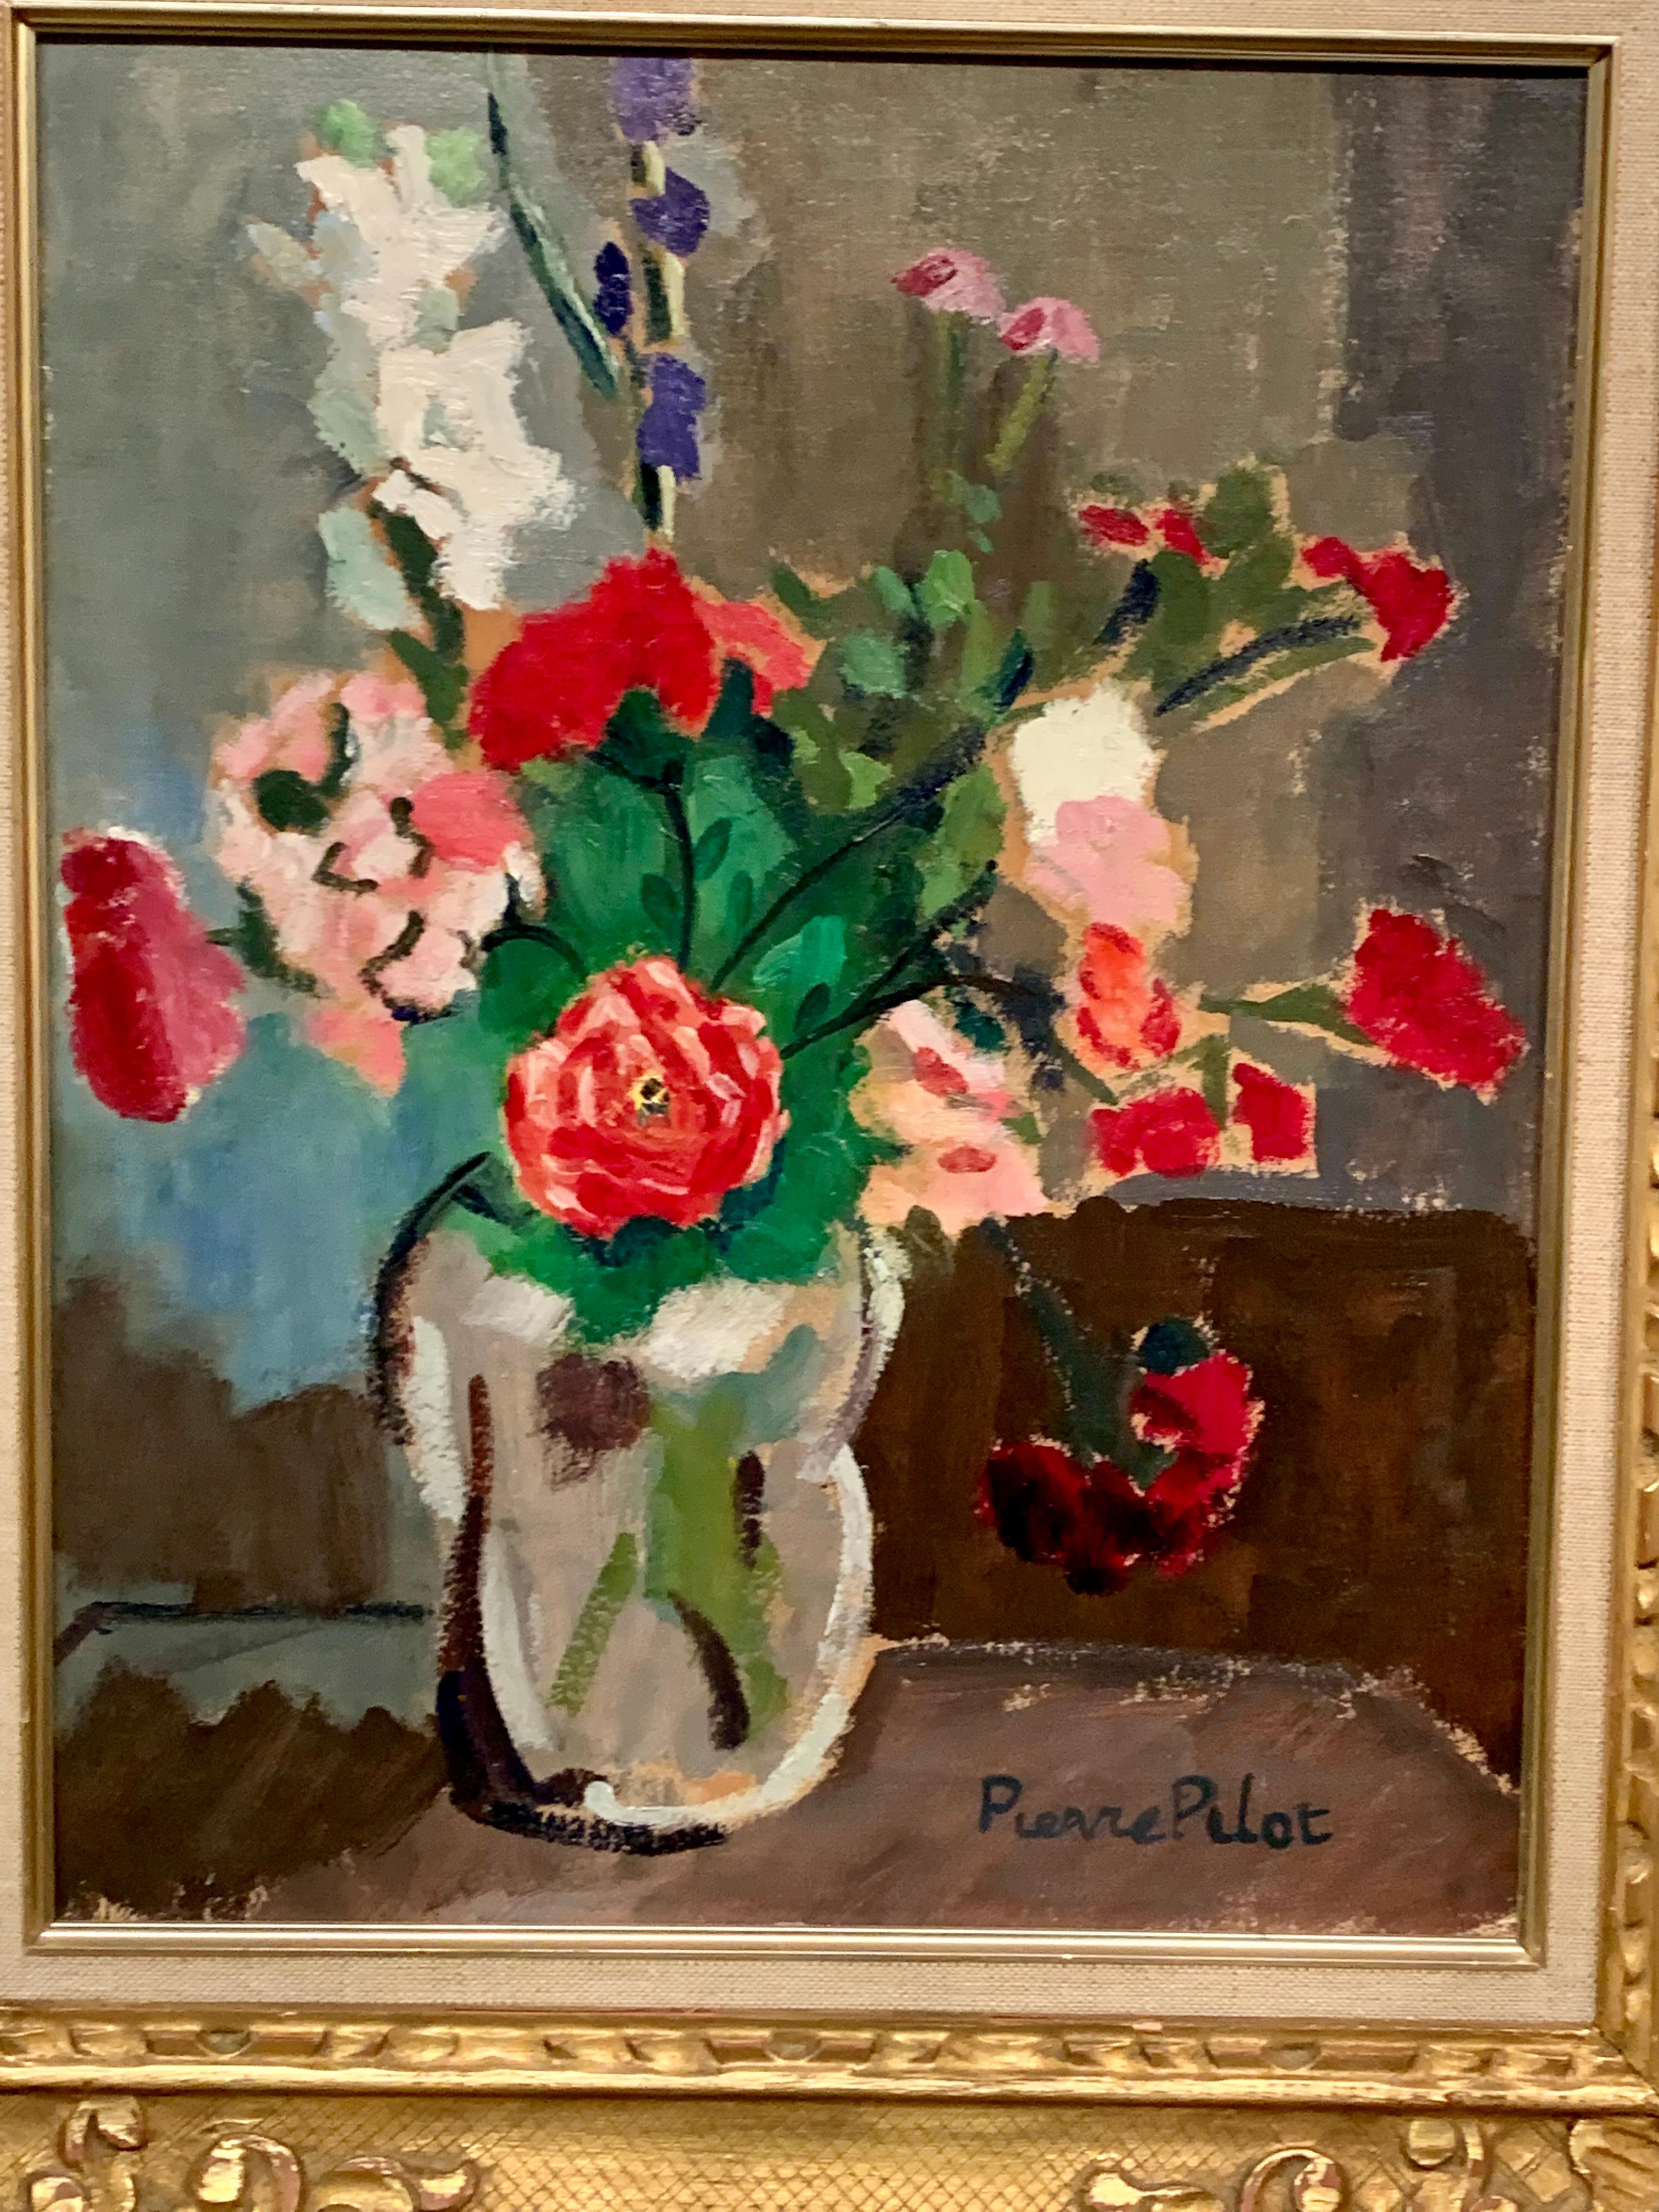 Mid Century French Impressionist still live of flowers in a vase - Painting by Pierre Pilot